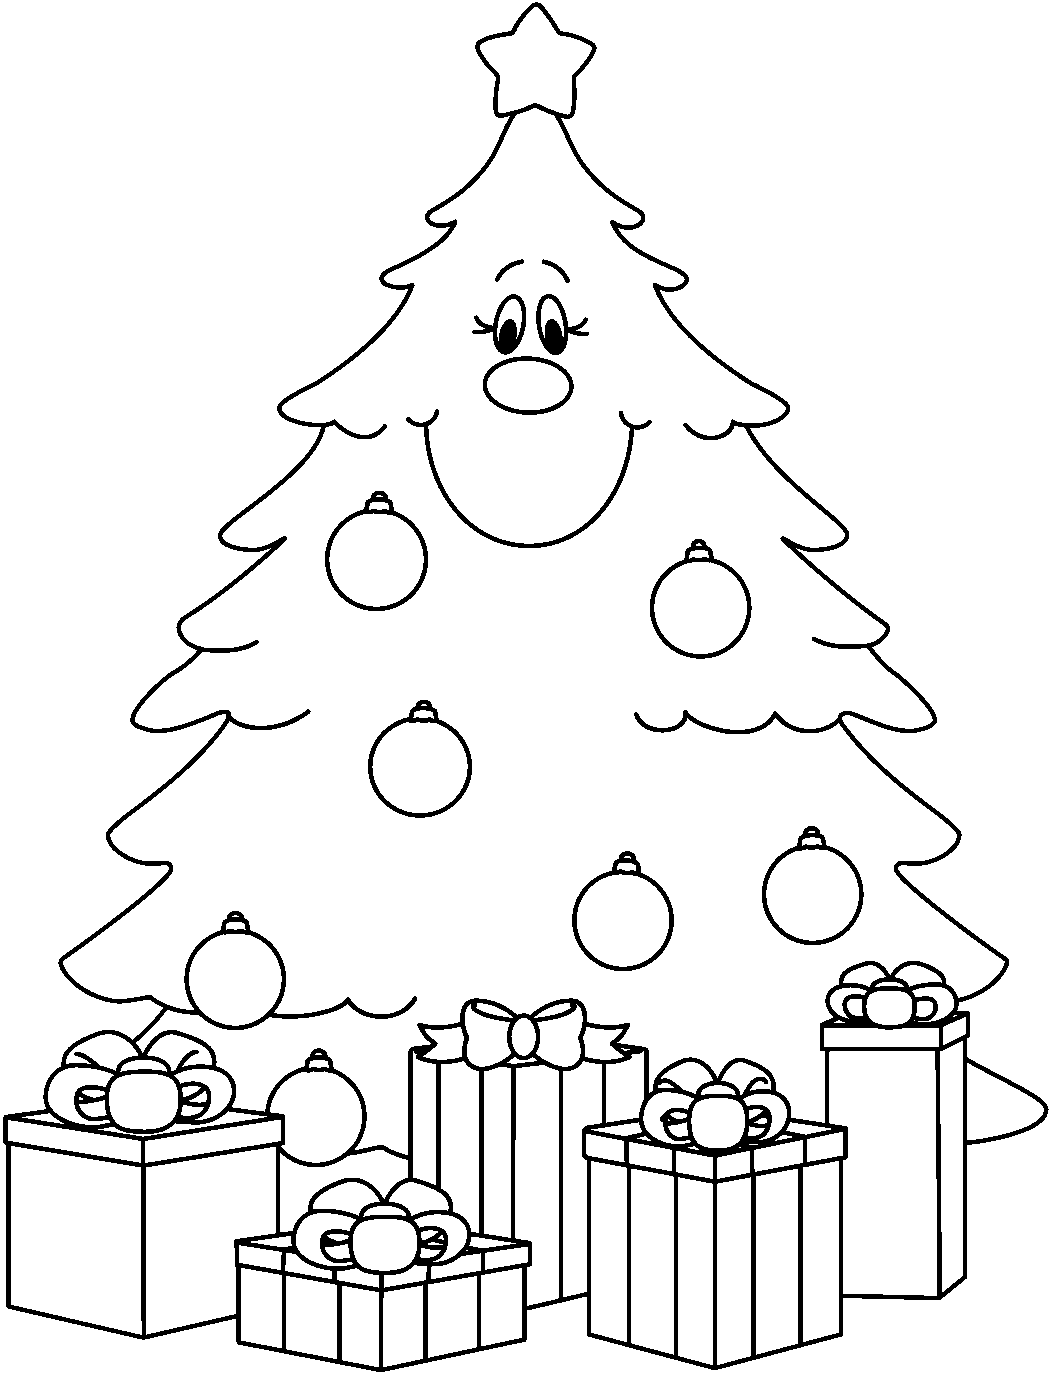 Images of Christmas Tree .